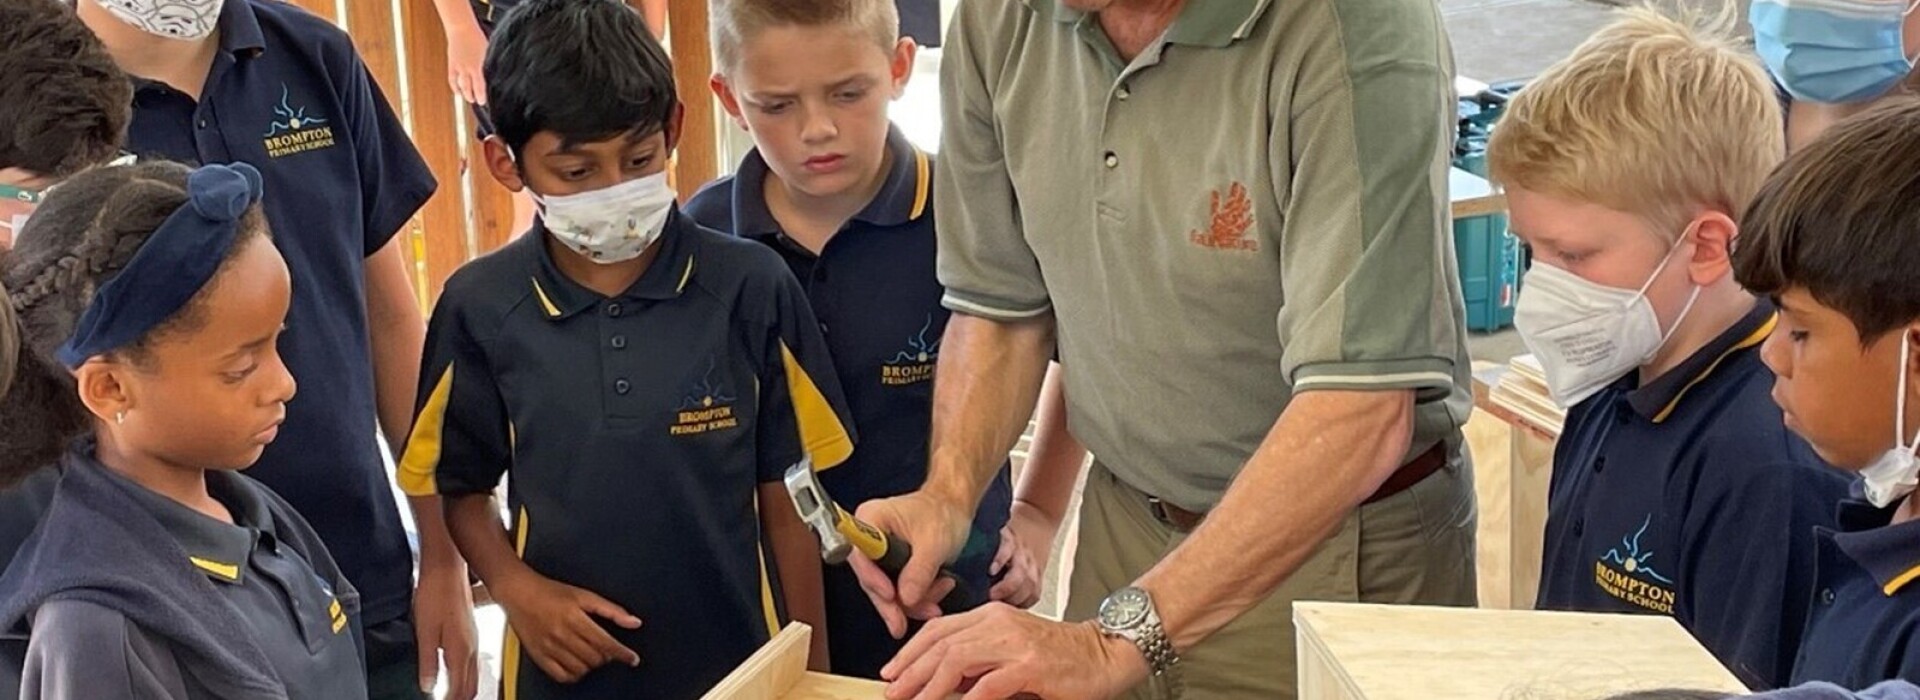 Building bird boxes with local schools